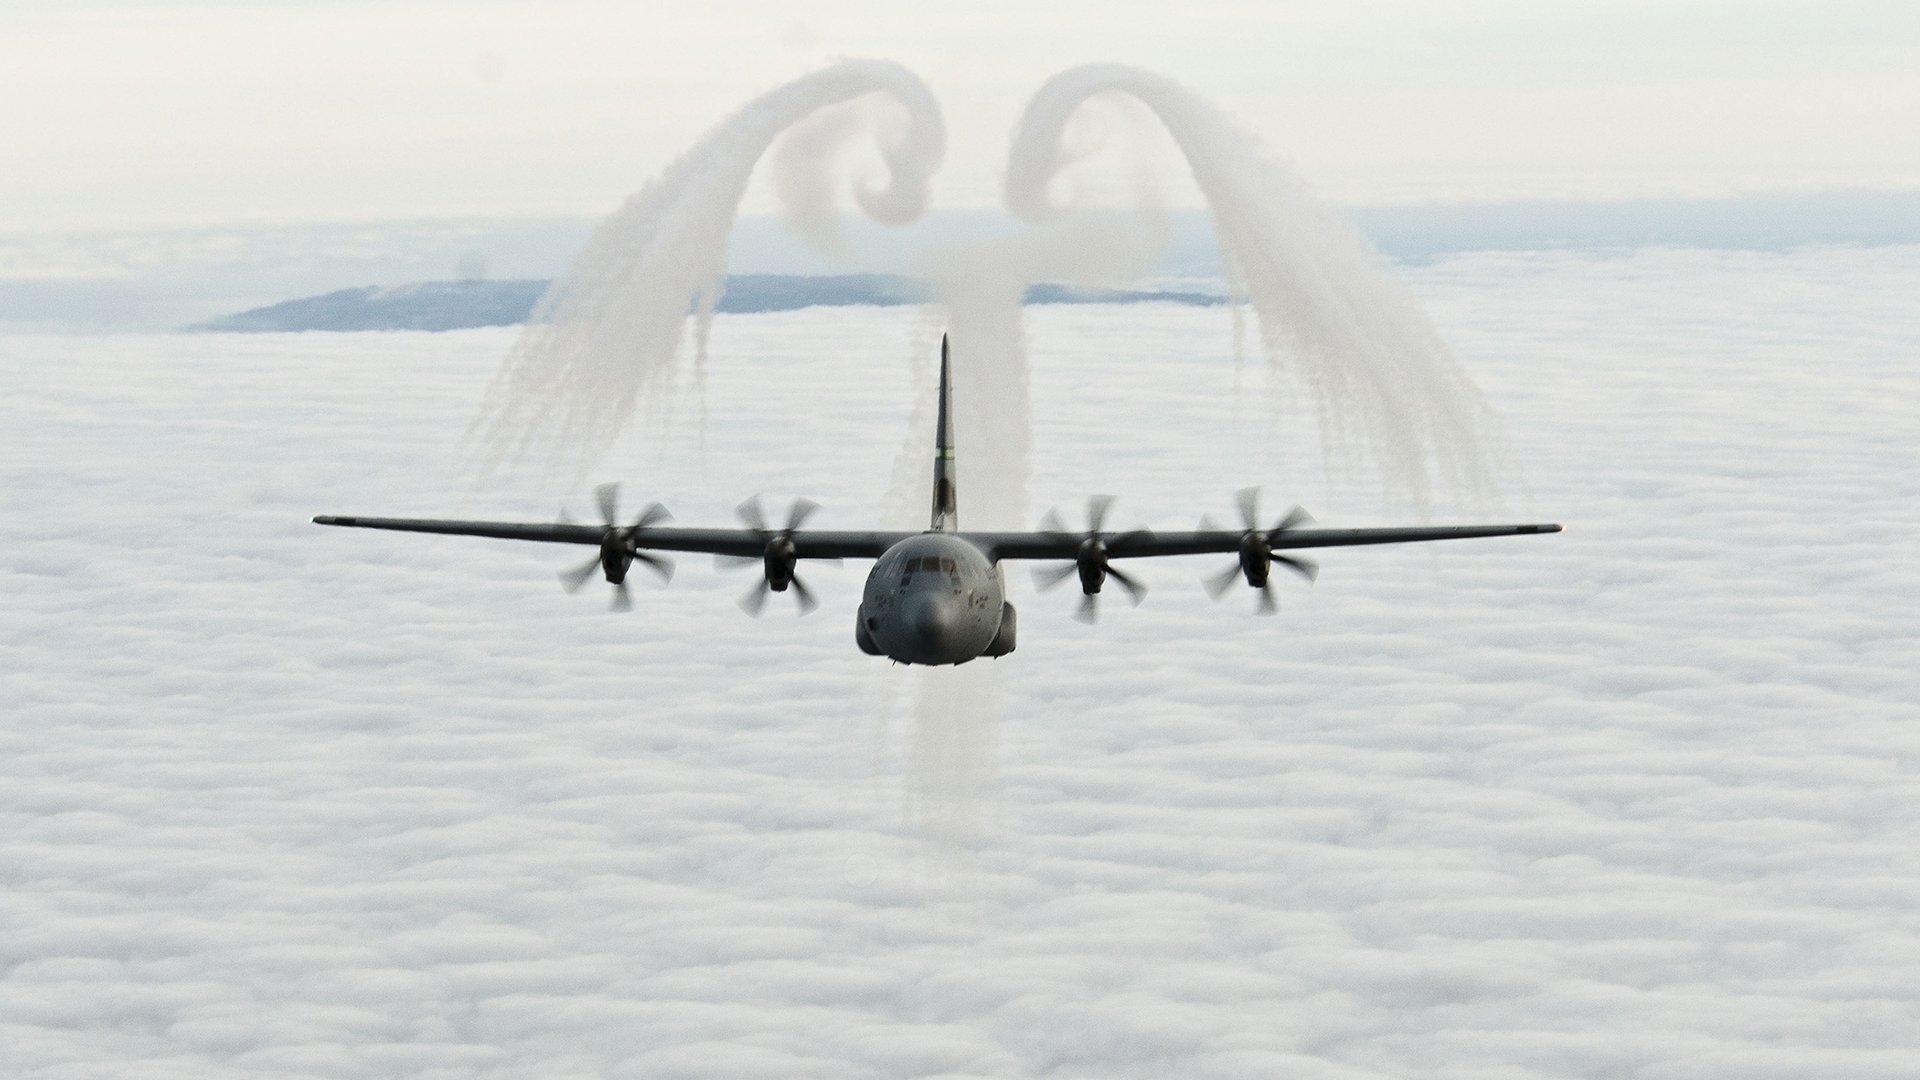 Wallpaper Lockheed LC-130 Hercules, plane, south pole, snow 1920x1200 HD  Picture, Image